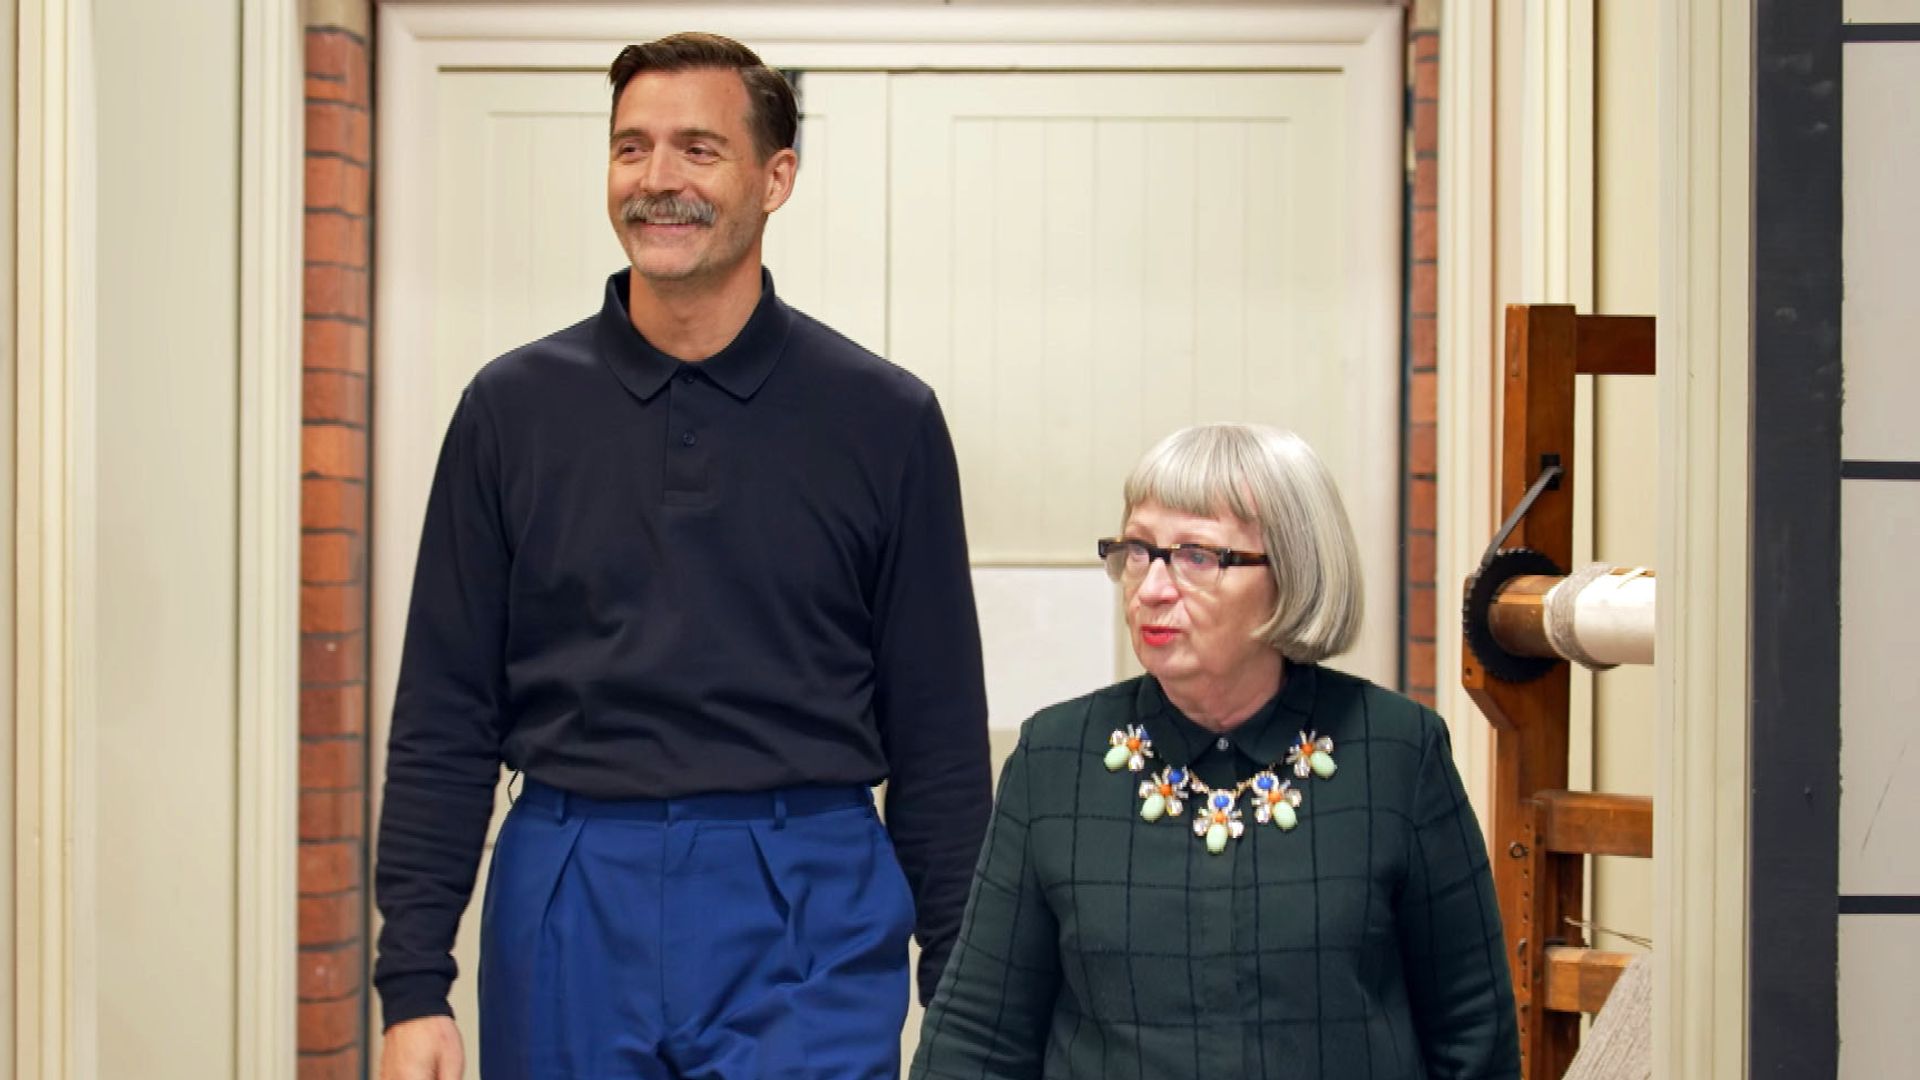 The Great British Sewing Bee's Patrick Grant and Esme Young